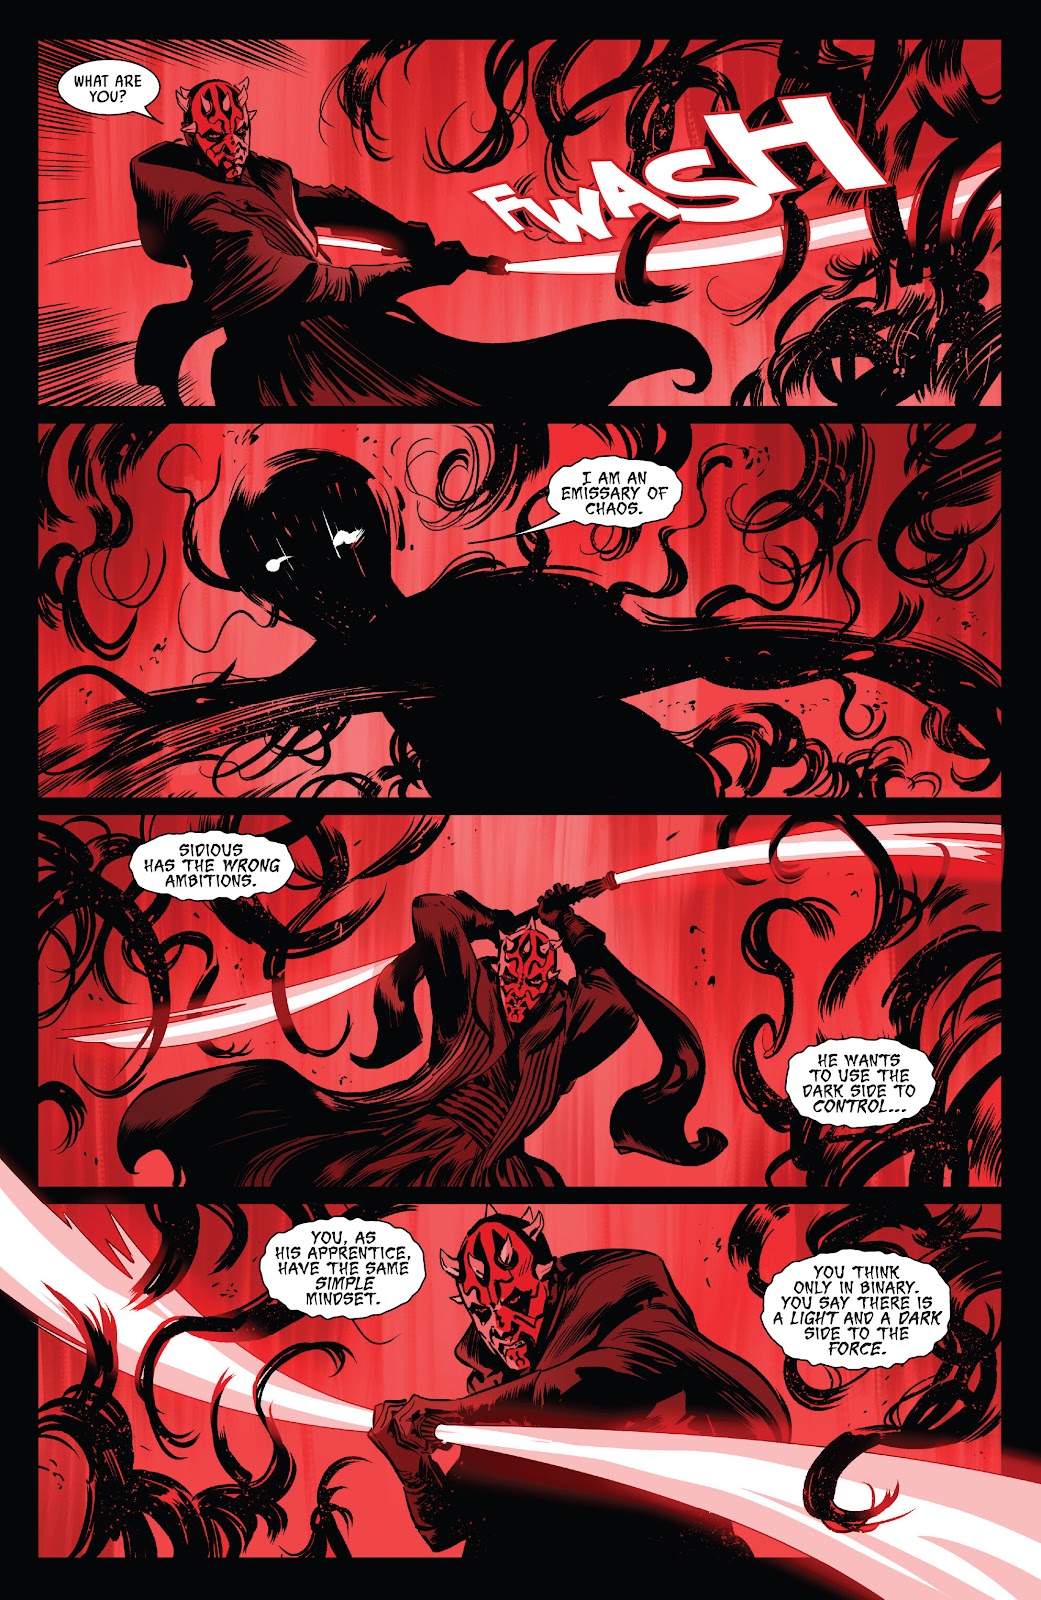 Star Wars: Darth Maul - Black, White & Red issue 1 - Page 25